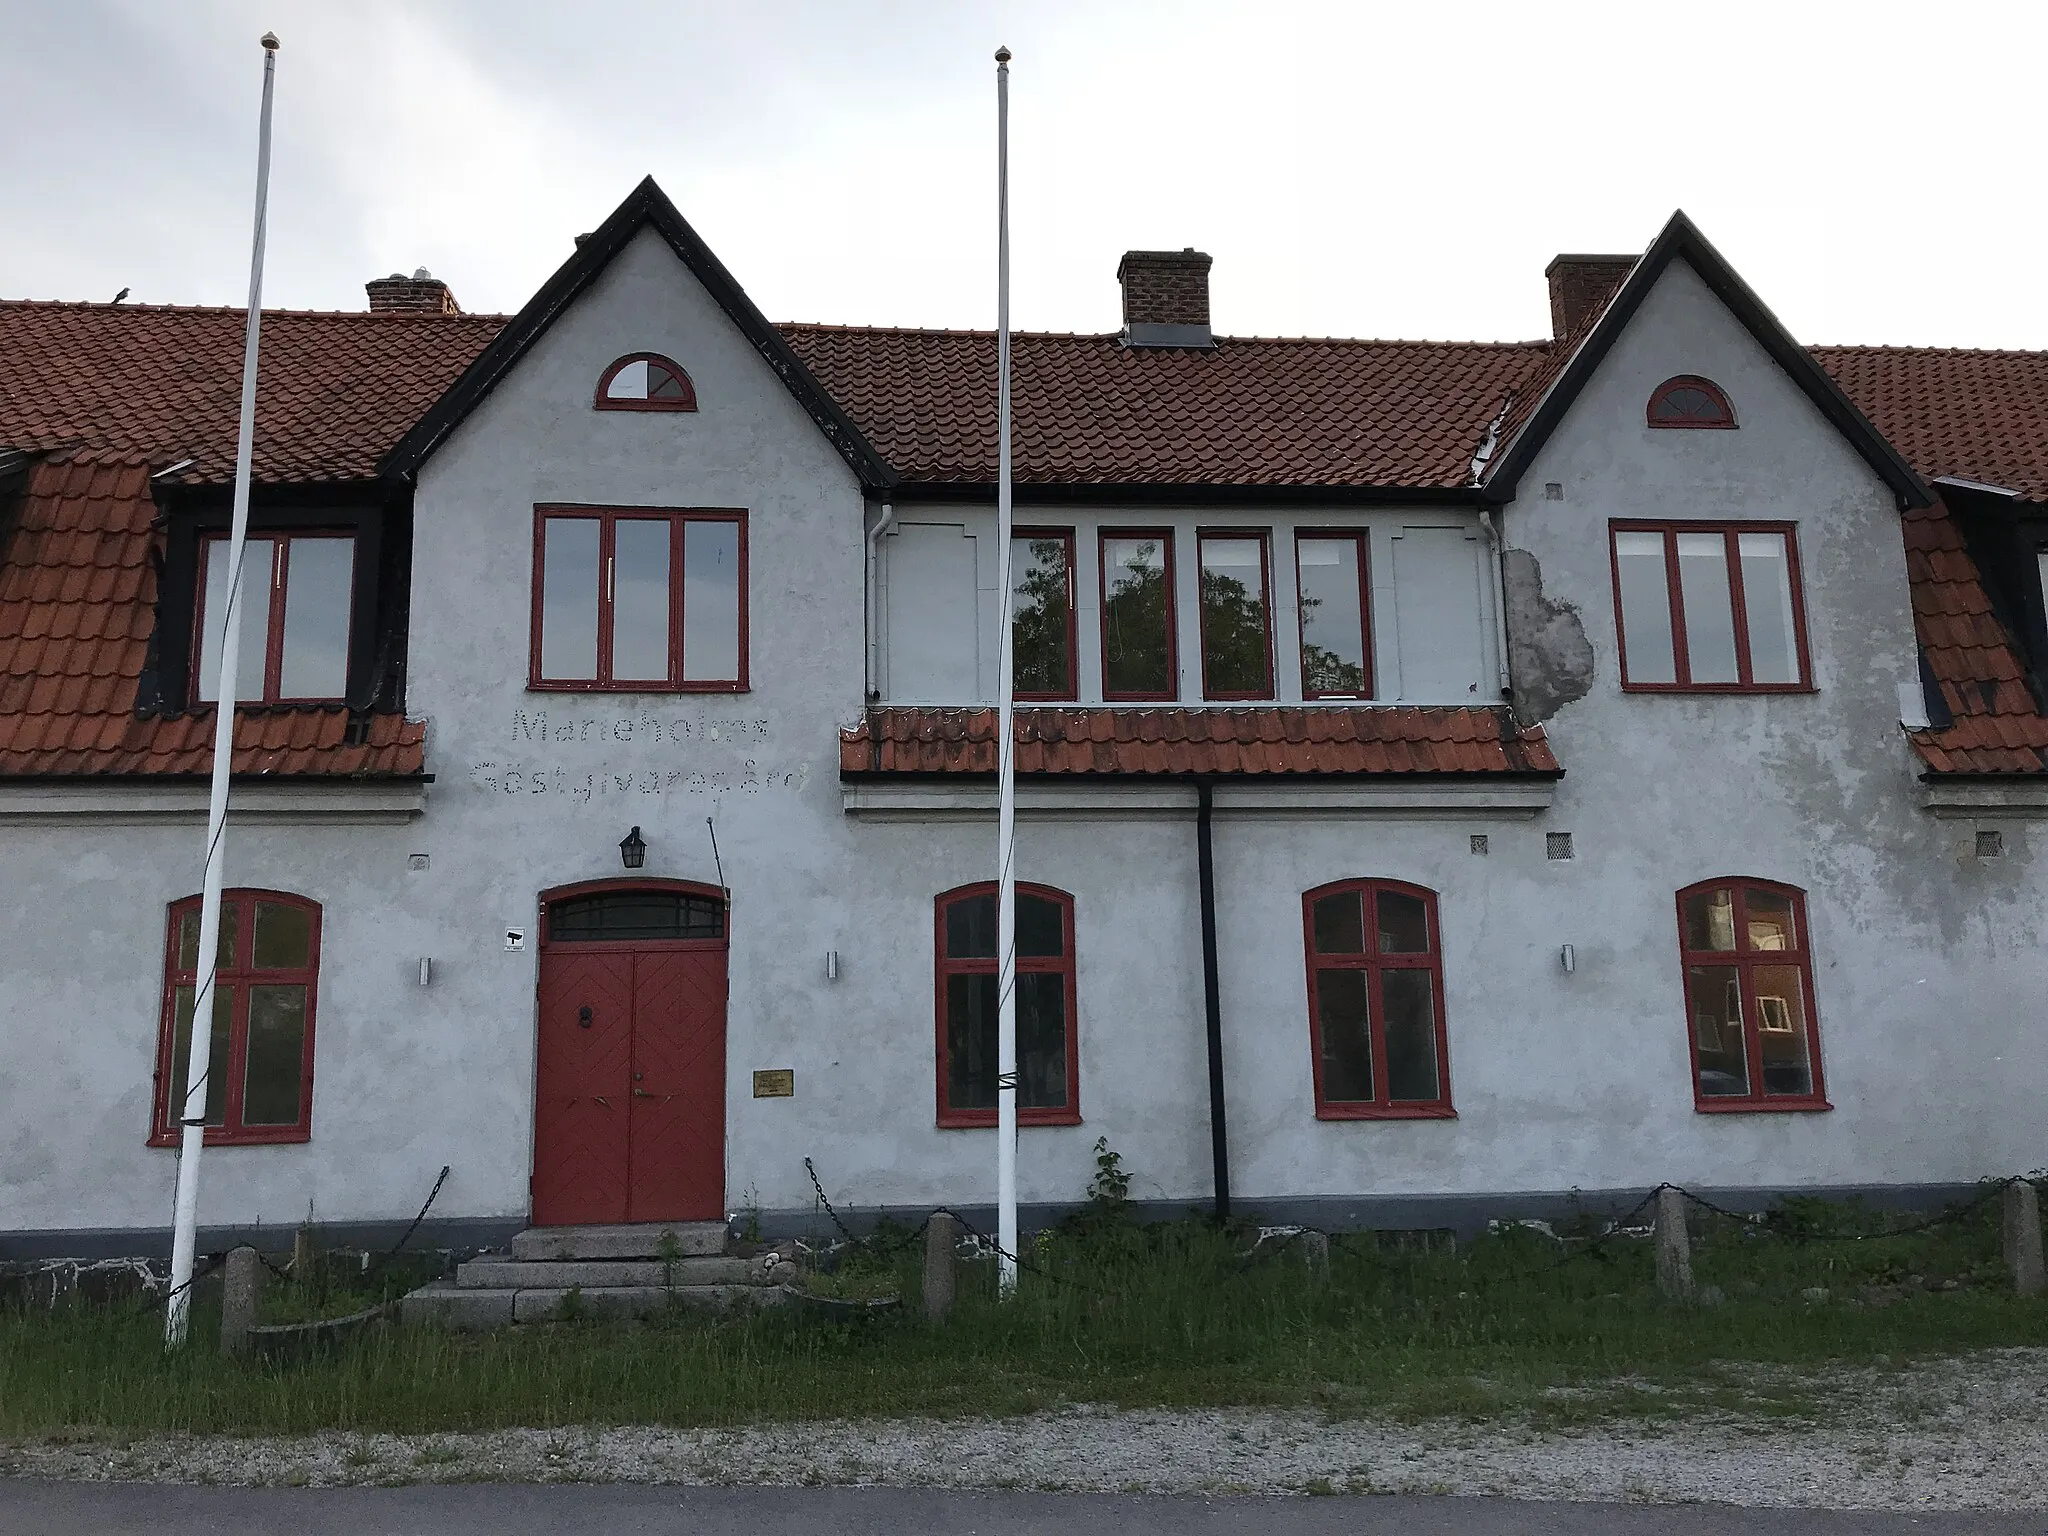 Photo showing: Entrance of the former Marieholm Inn (gästgivaregård) in Marieholm in Sweden, on May 24, 2019. The name Marieholms gästgivaregård is vaguely visible above the entrance door.